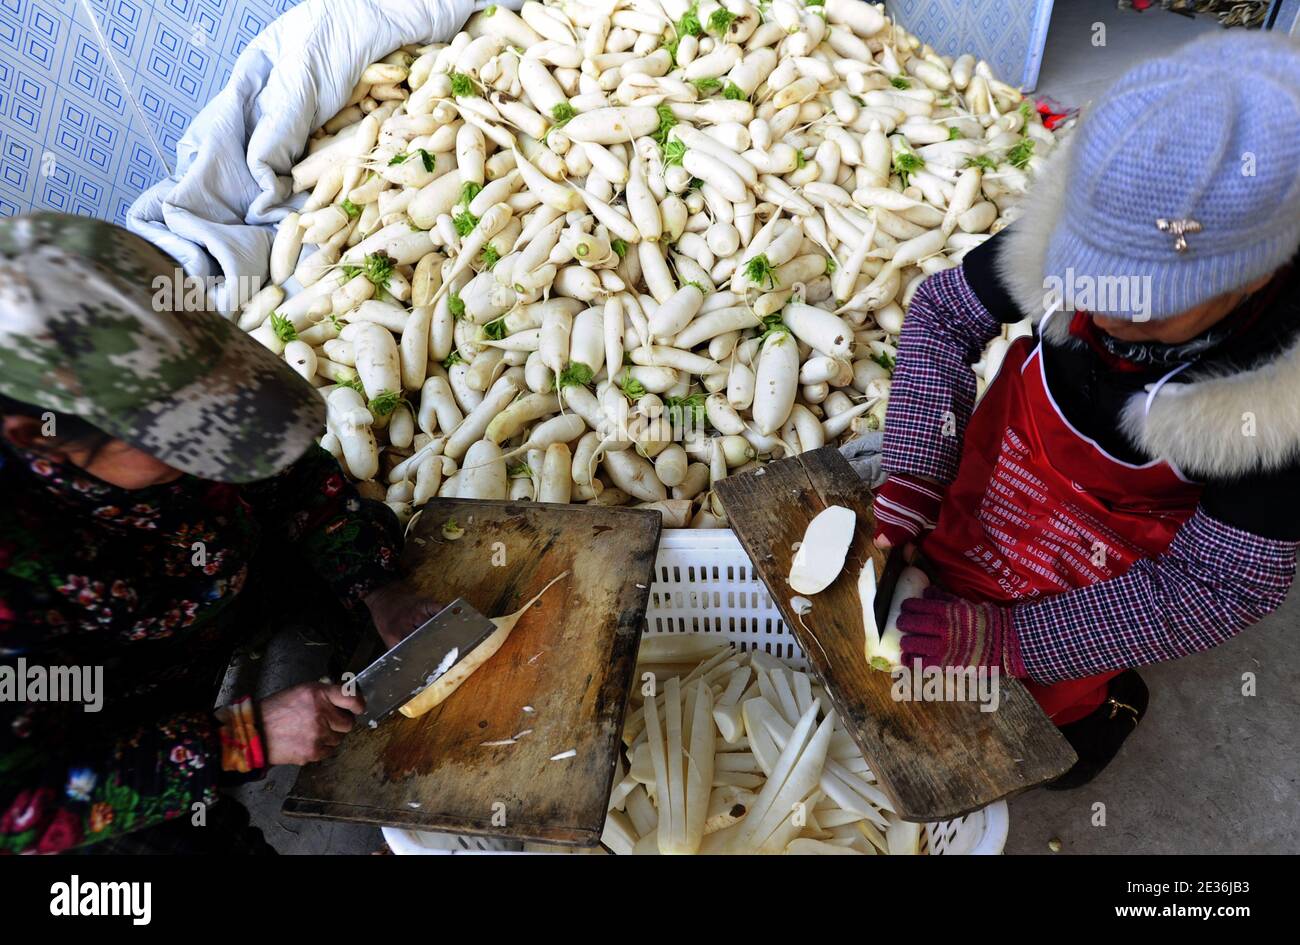 Local farmers collect white radishes and dry them in Guangyi Village, Shimen Township, Yunyang County, Chongqing, China, 14 January 2021.    Dried rad Stock Photo